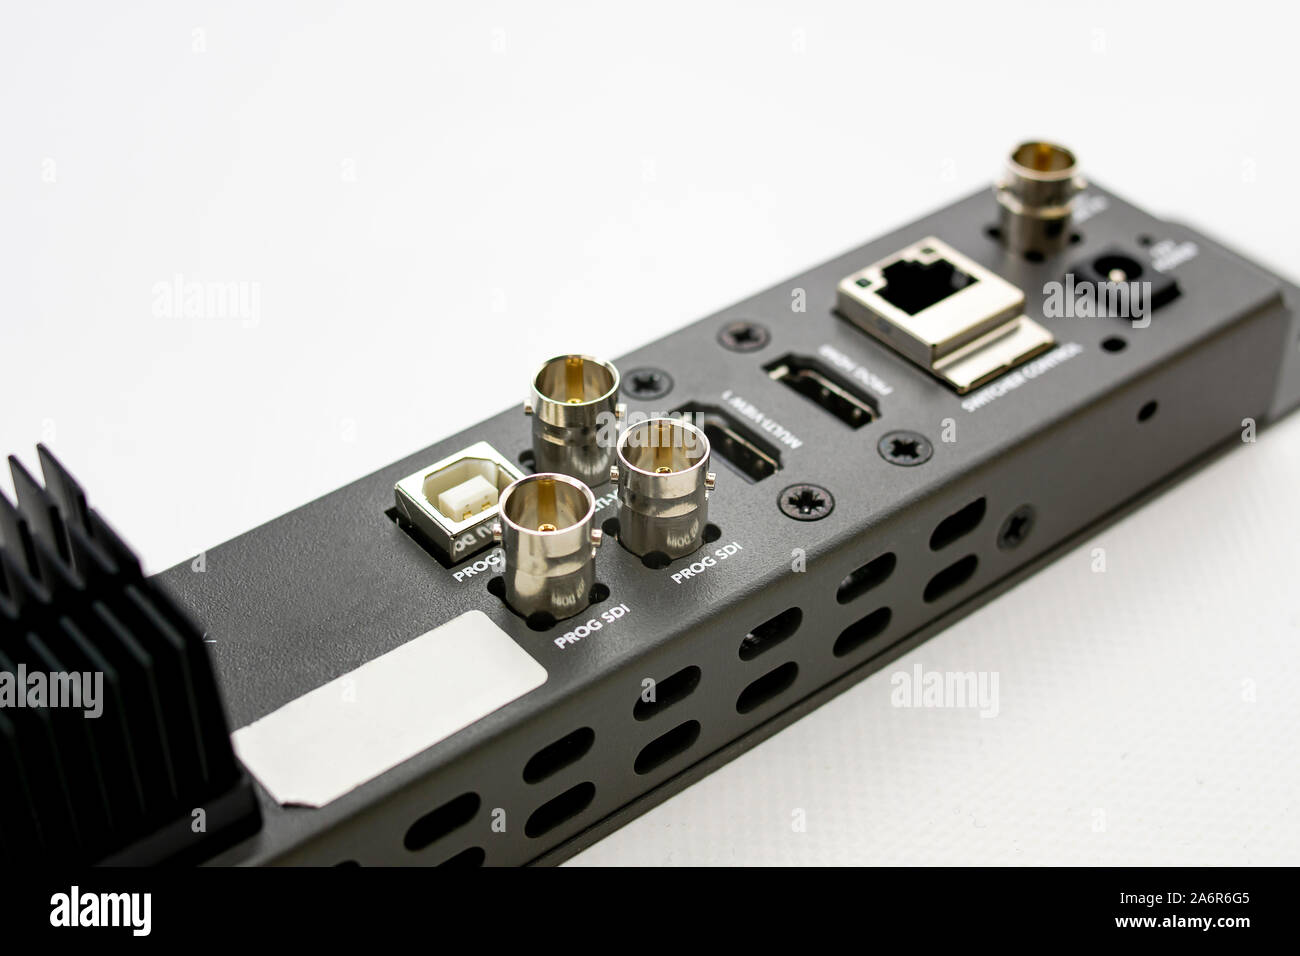 rear connectors of a live television signal realization device, with sdi, hdmi, rj45, ethernet, television antenna and usb connections for device and Stock Photo